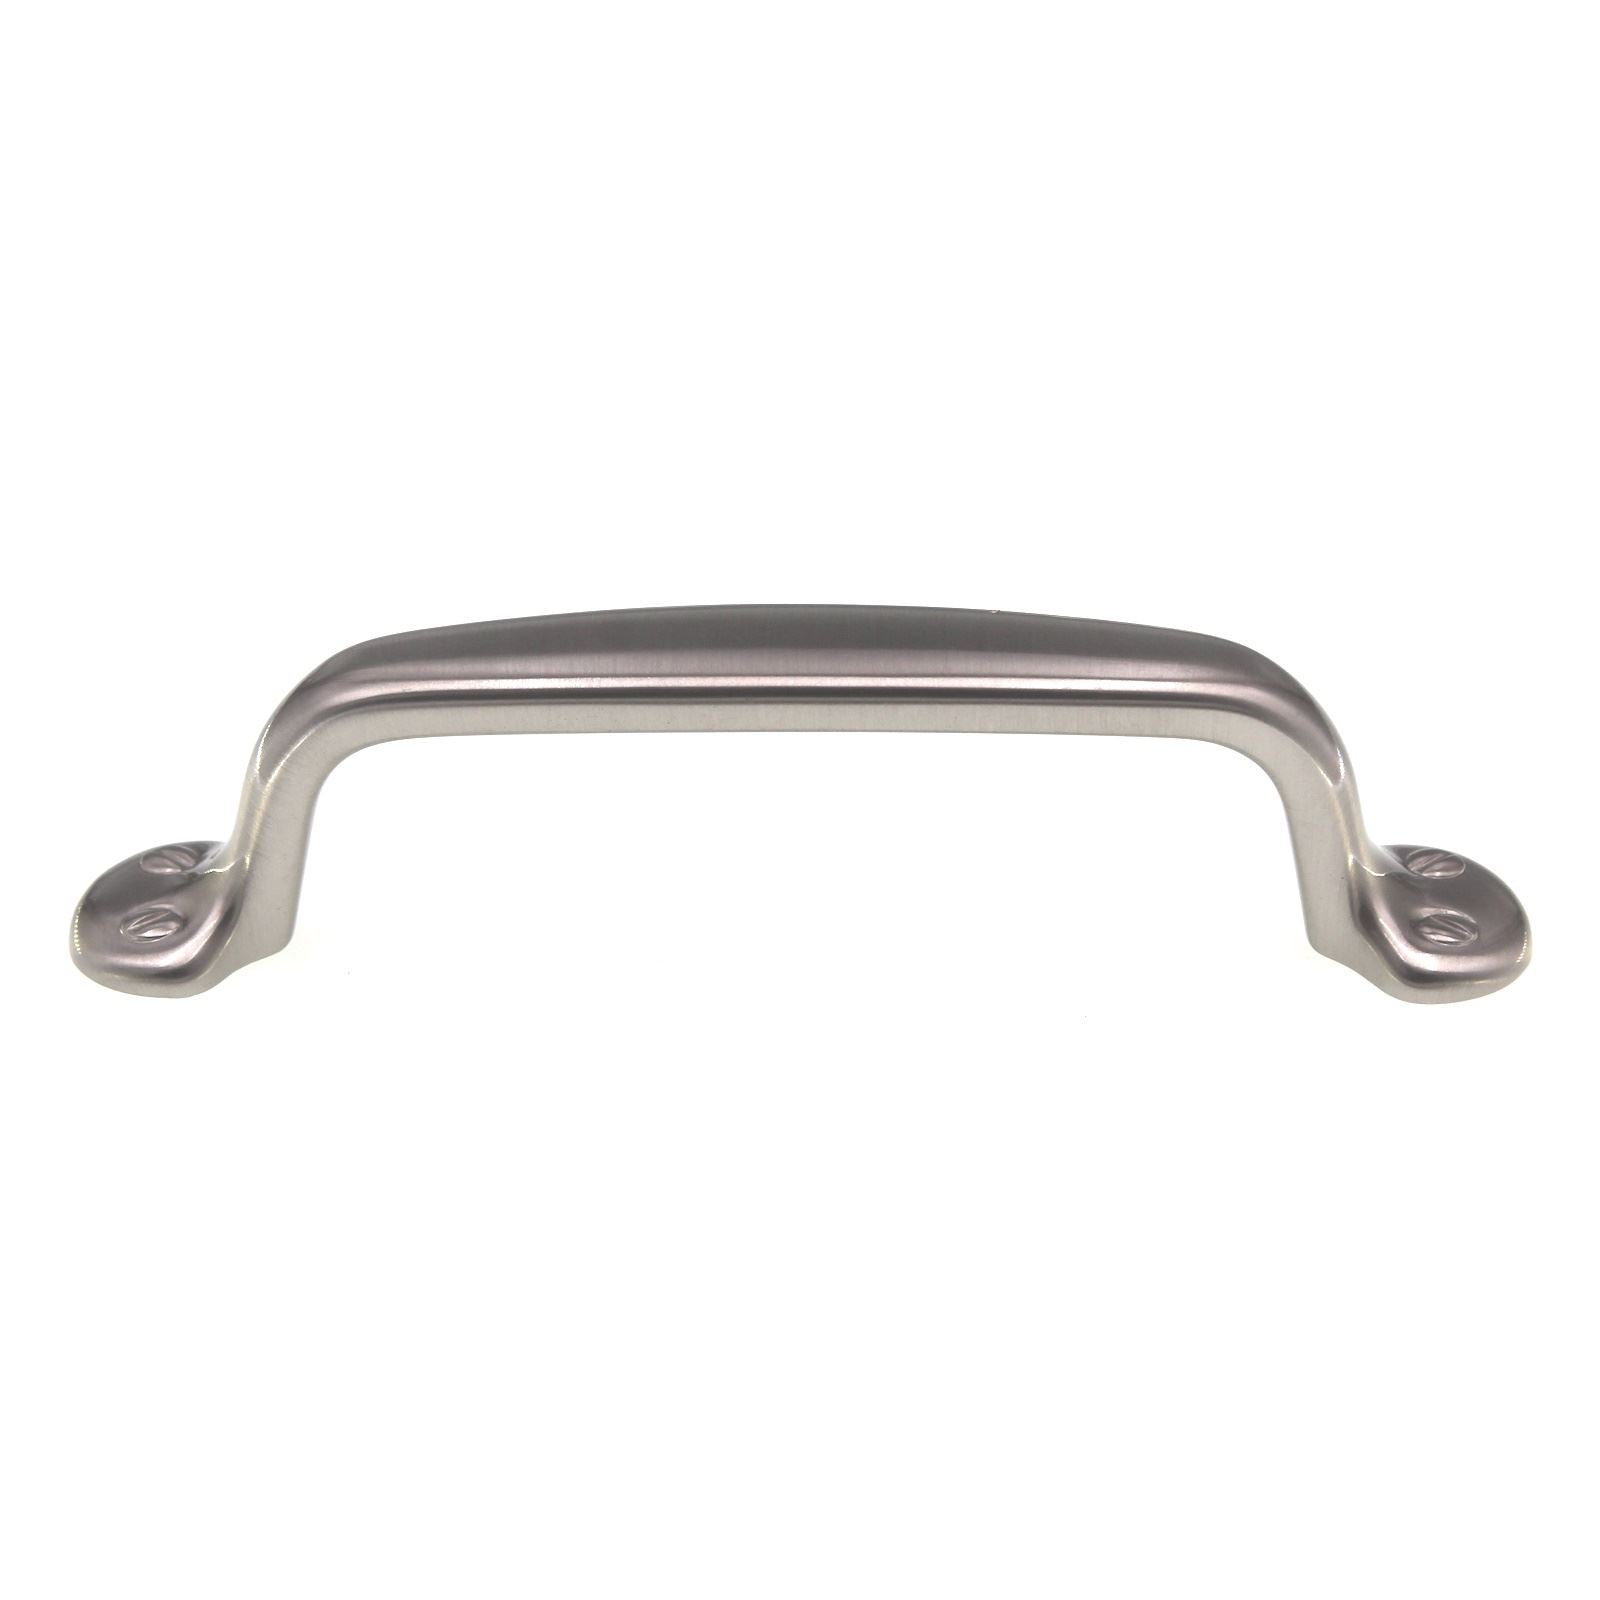 Schaub And Company Country Cabinet Arch Pull 4" Ctr Satin Nickel 742-15